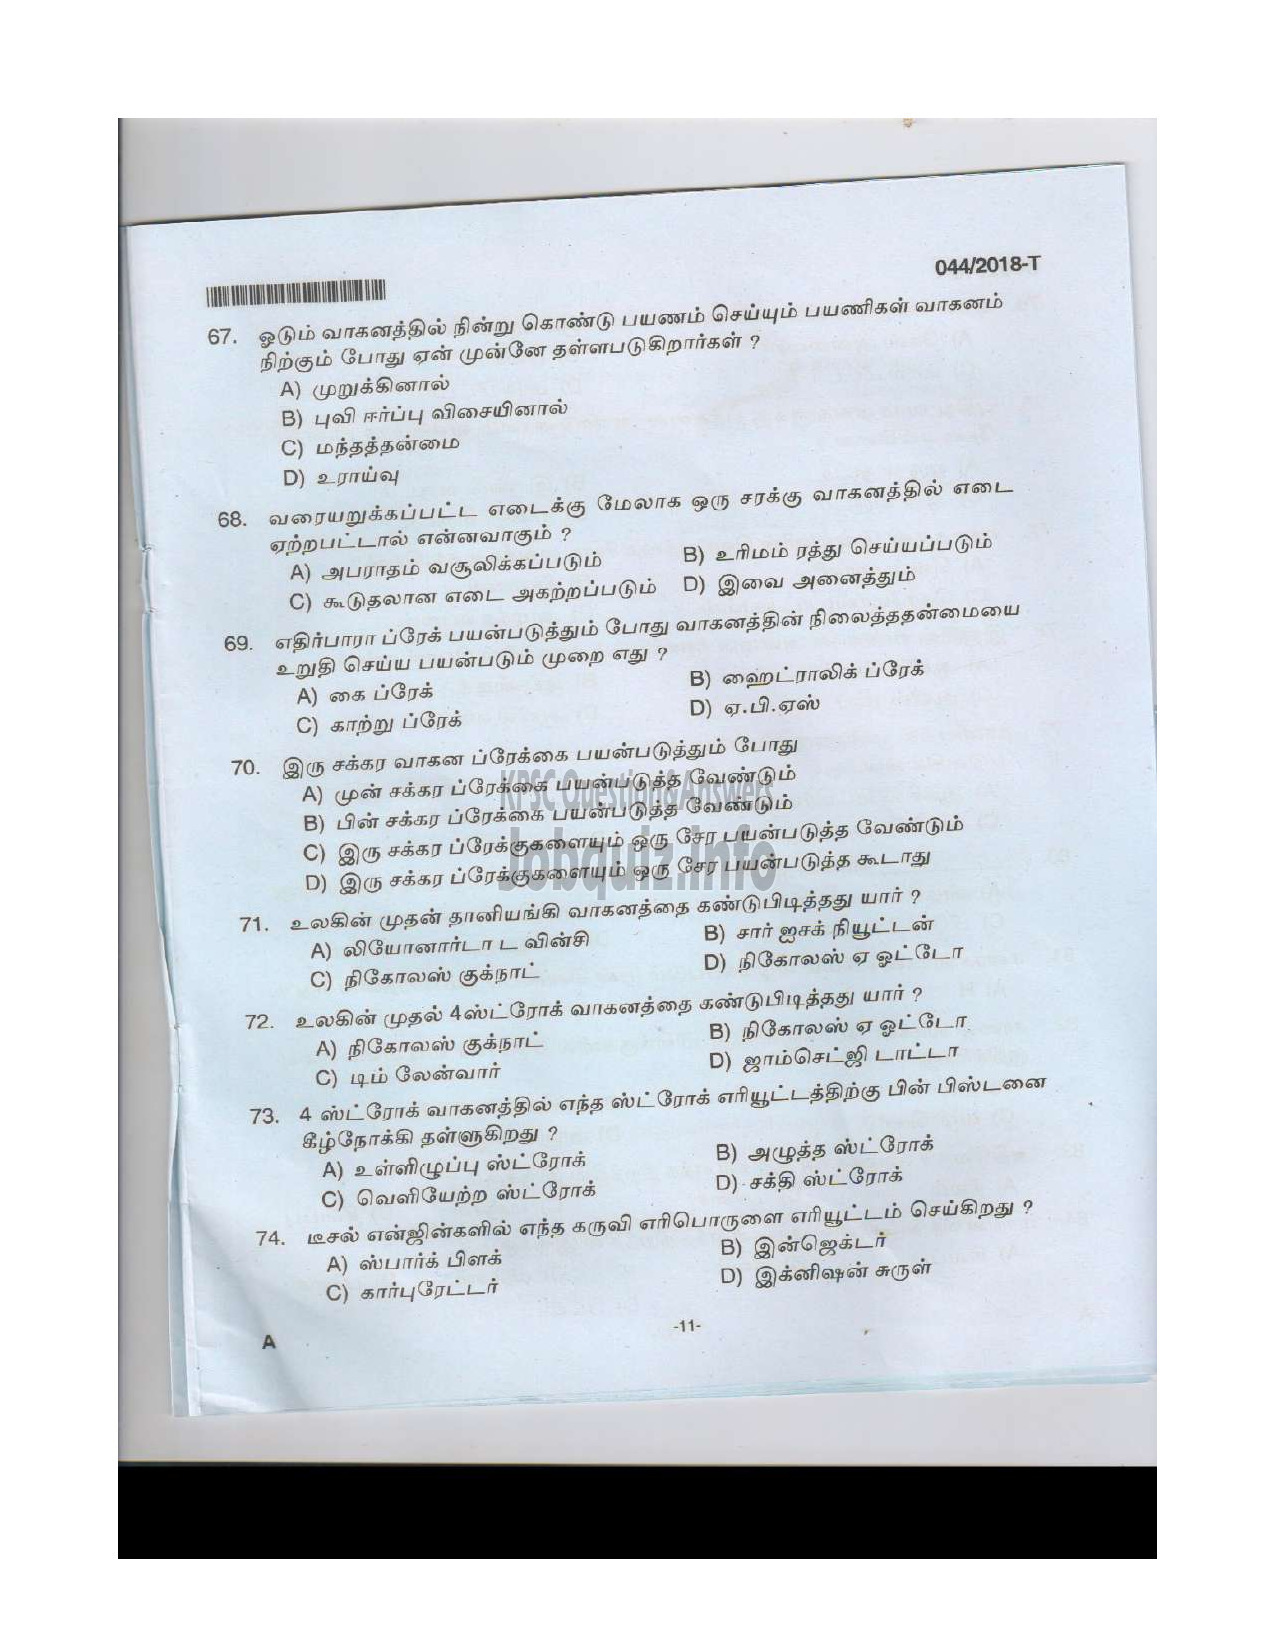 Kerala PSC Question Paper - FOREST DRIVER FOREST TAMIL-10